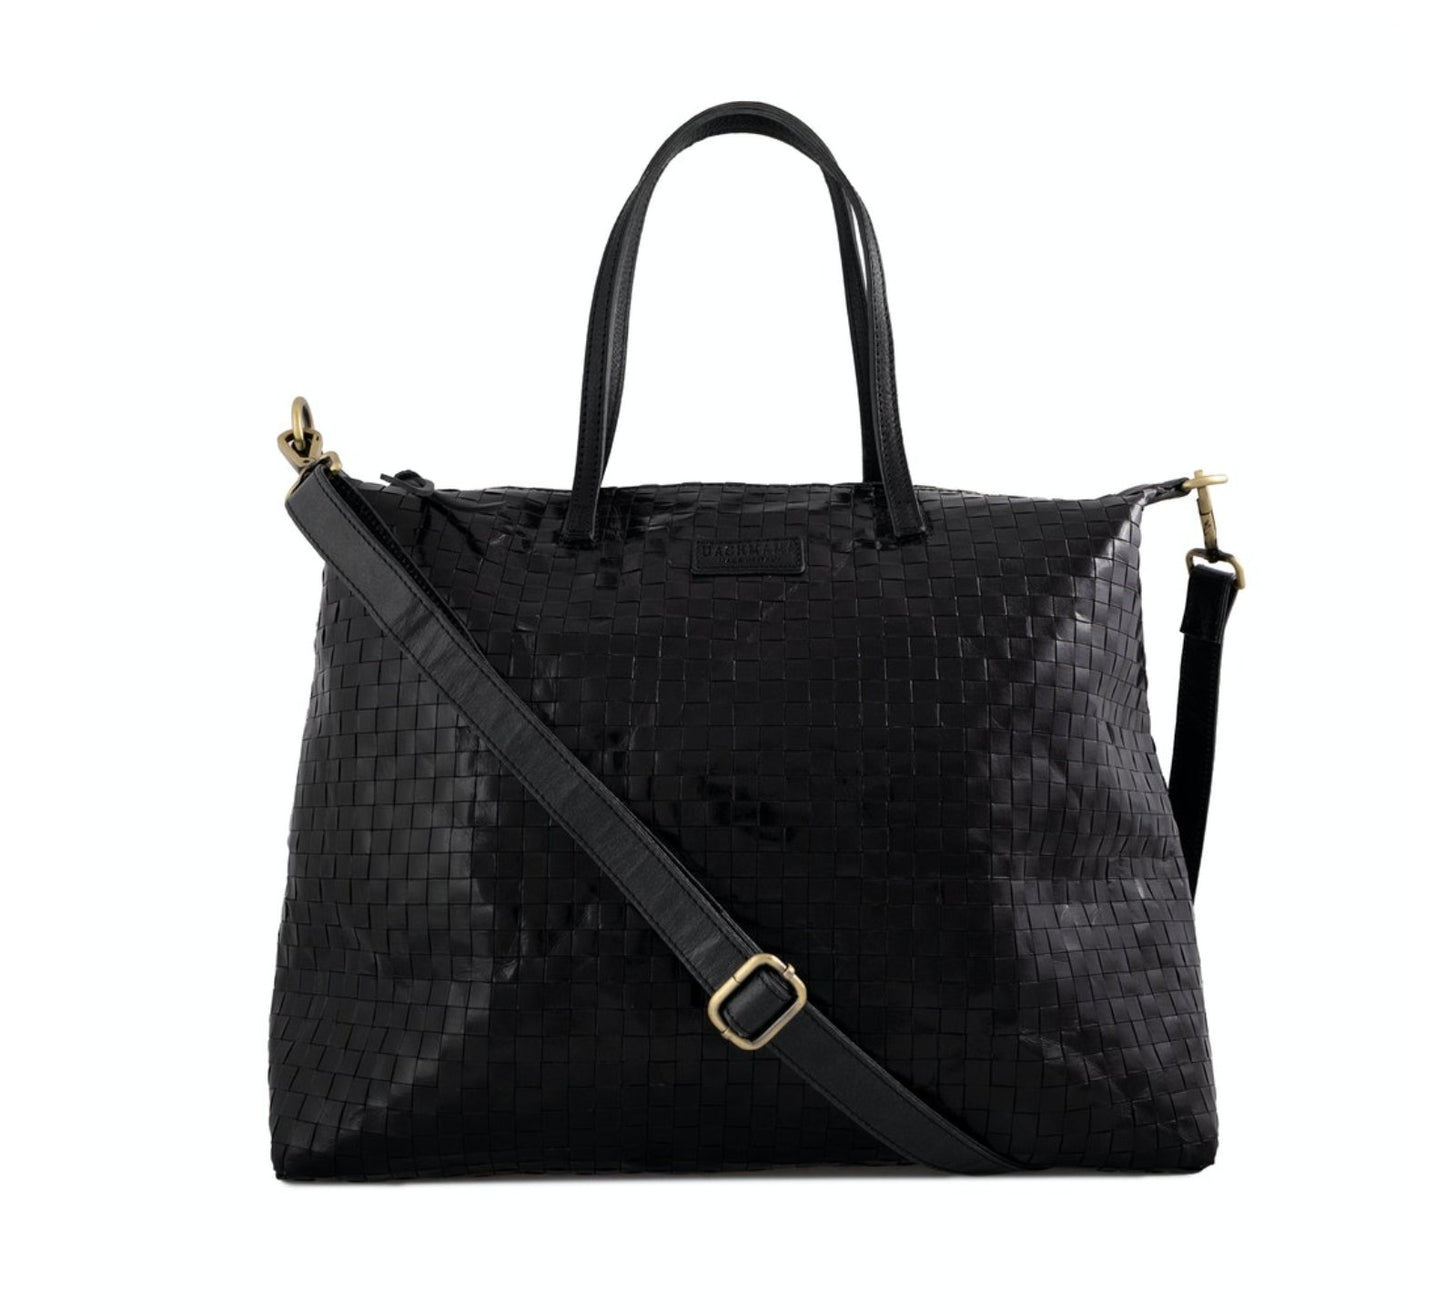 A large black woven washable paper tote is shown from the front angle. It features two top handles and a long washable paper black shoulder strap with brass hardware.